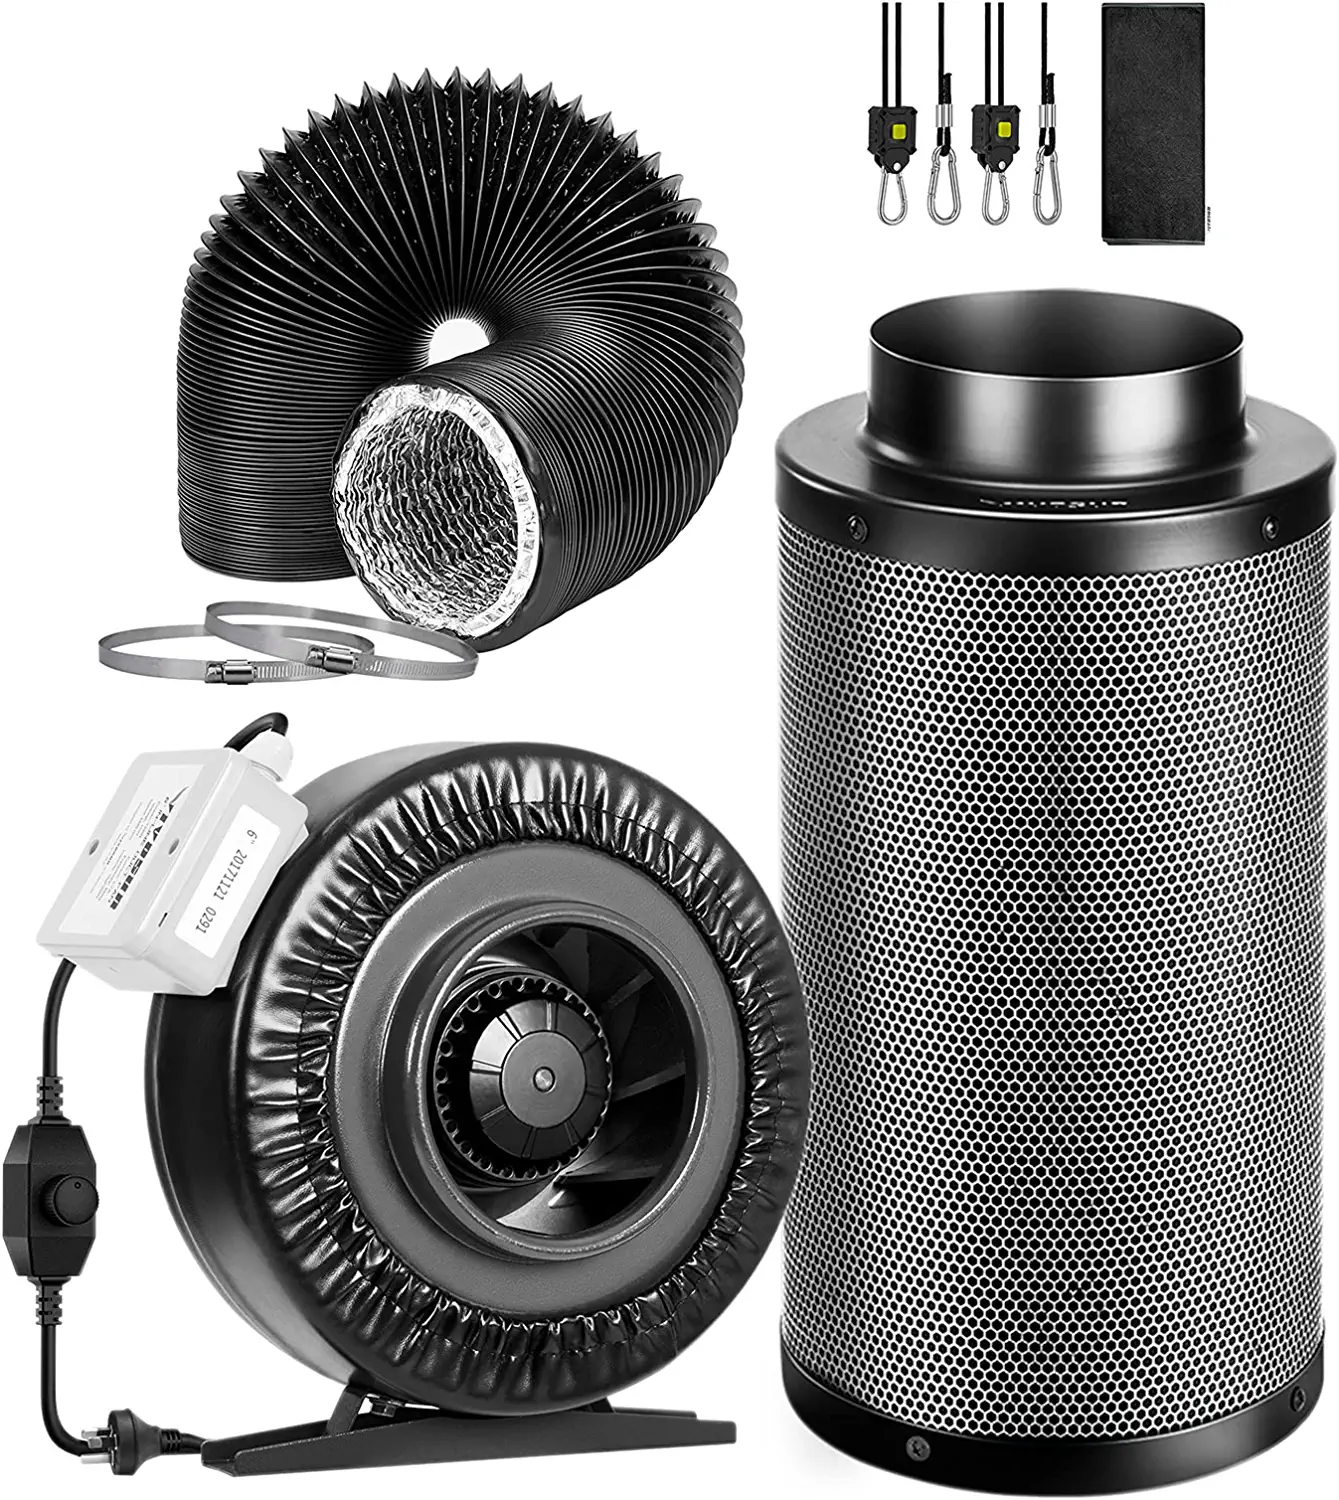 VIVOSUN 6-Inch 440 CFM Inline Duct Fan Kit with Black Carbon Filter and Black Ducting